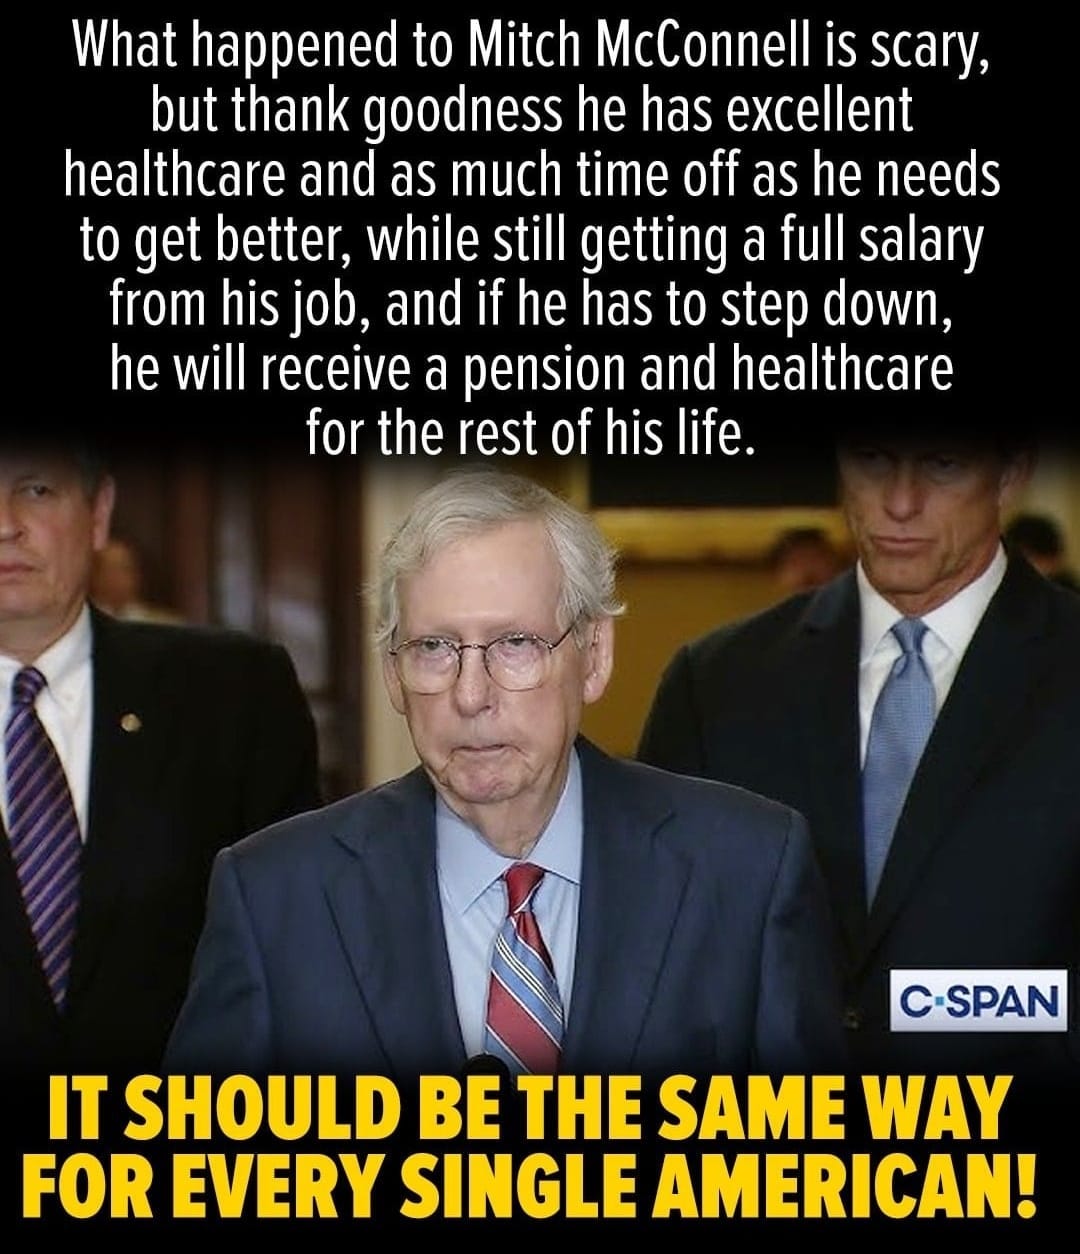 C-SPAN image showing Mitch McConnel captioned: What happened to Mitch McConnell is scary, but thank goodness he has excellent healthcare and as much time off as he needs to get better, while still getting a full salary from his job, and if he has to step down, he will receive a pension and healthcare for the rest of his life. It should be the same way for every single American!